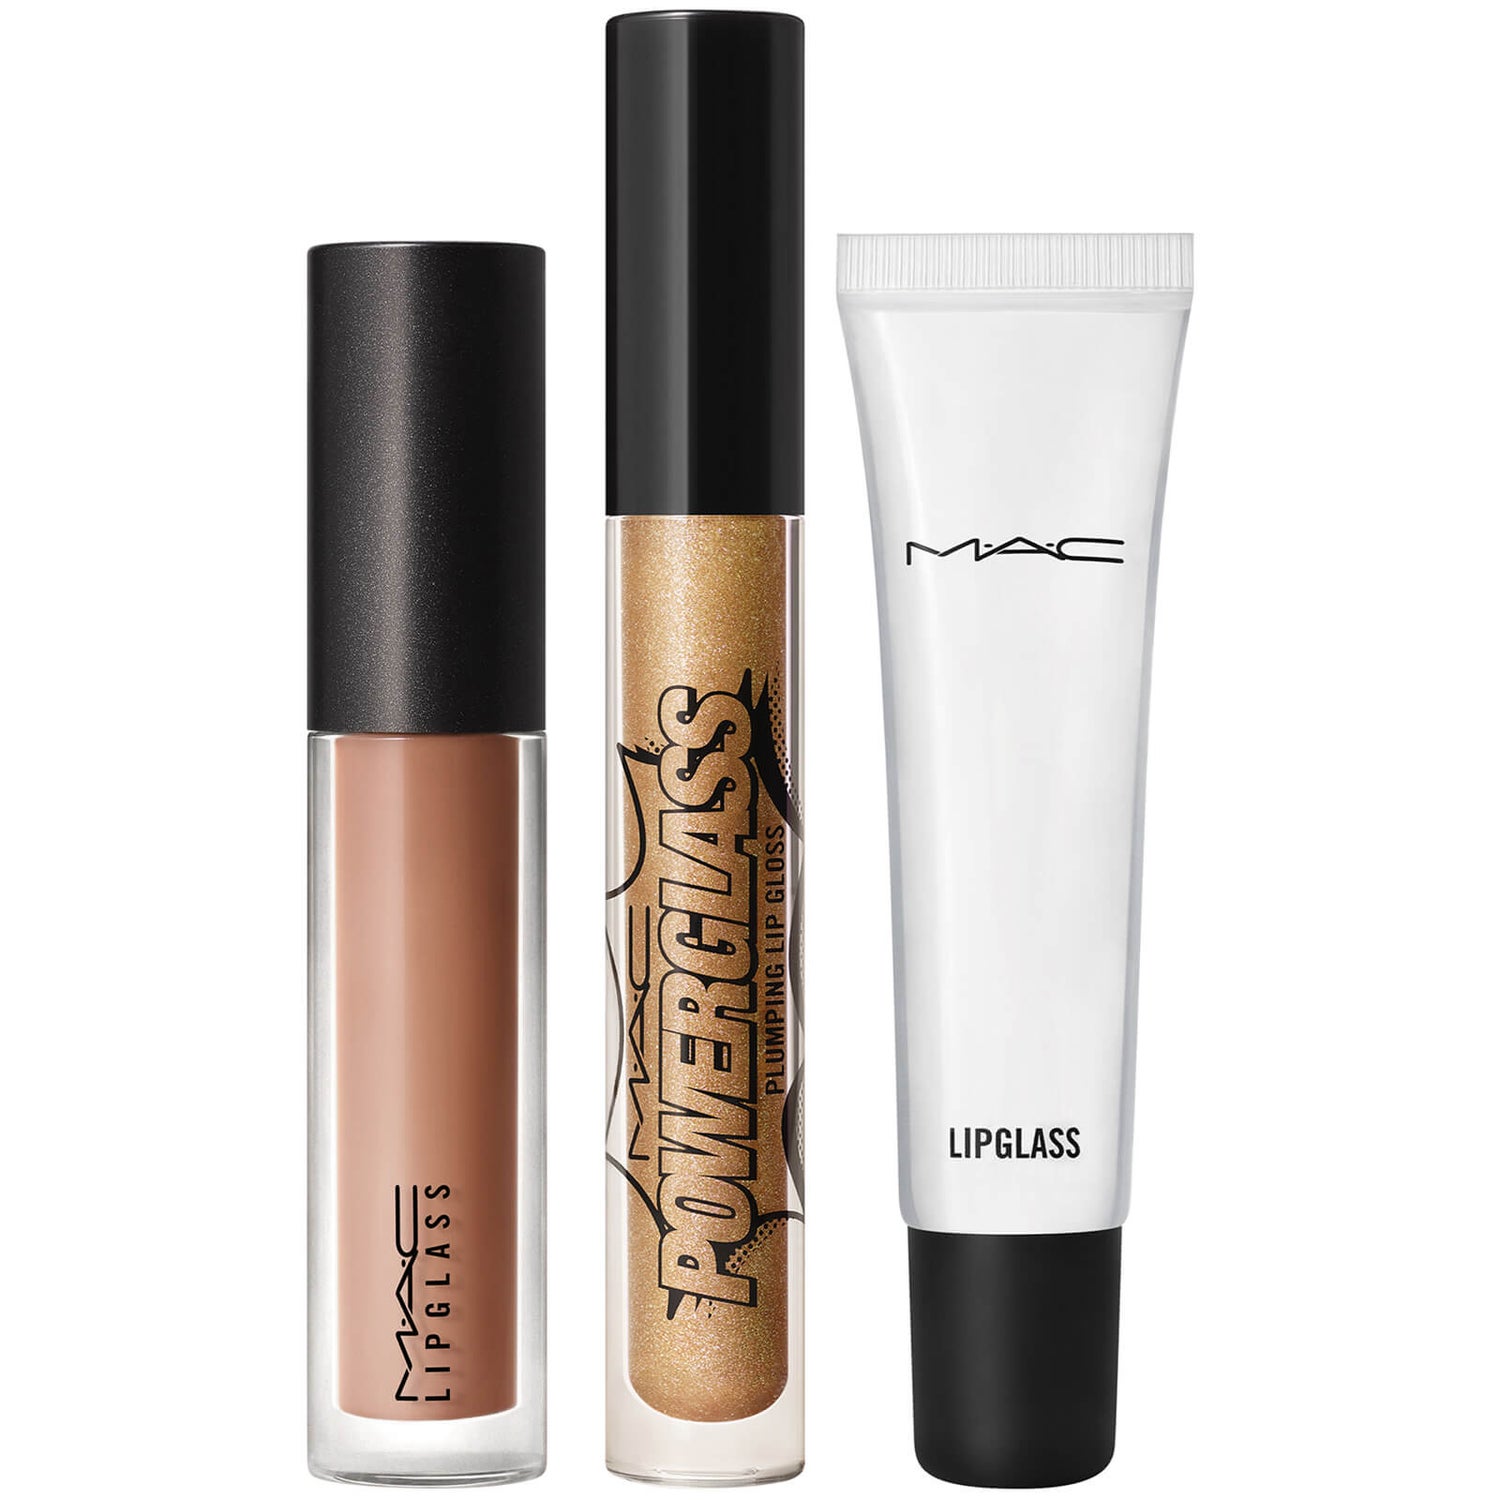 MAC Cheers To You! Lipglass Kit - Sparkling Wine